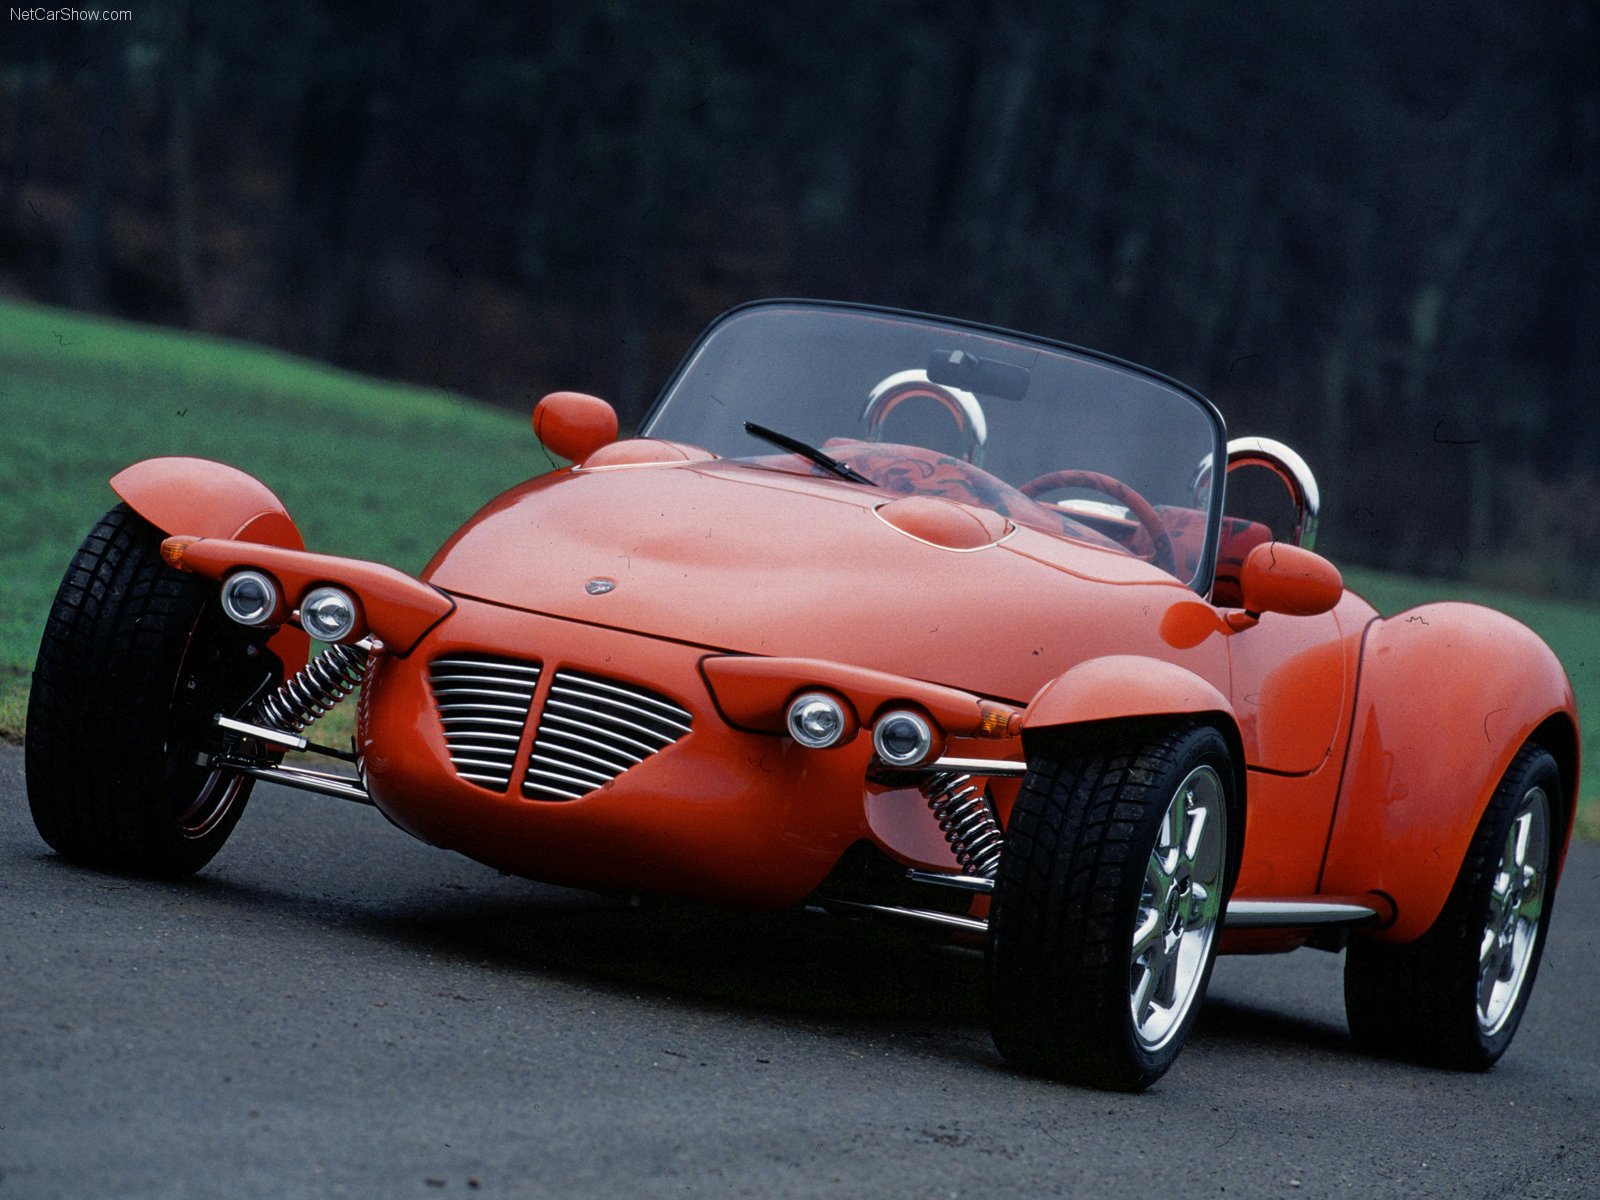 rinspeed, Roadster, Concept, Cars, 1995 Wallpaper